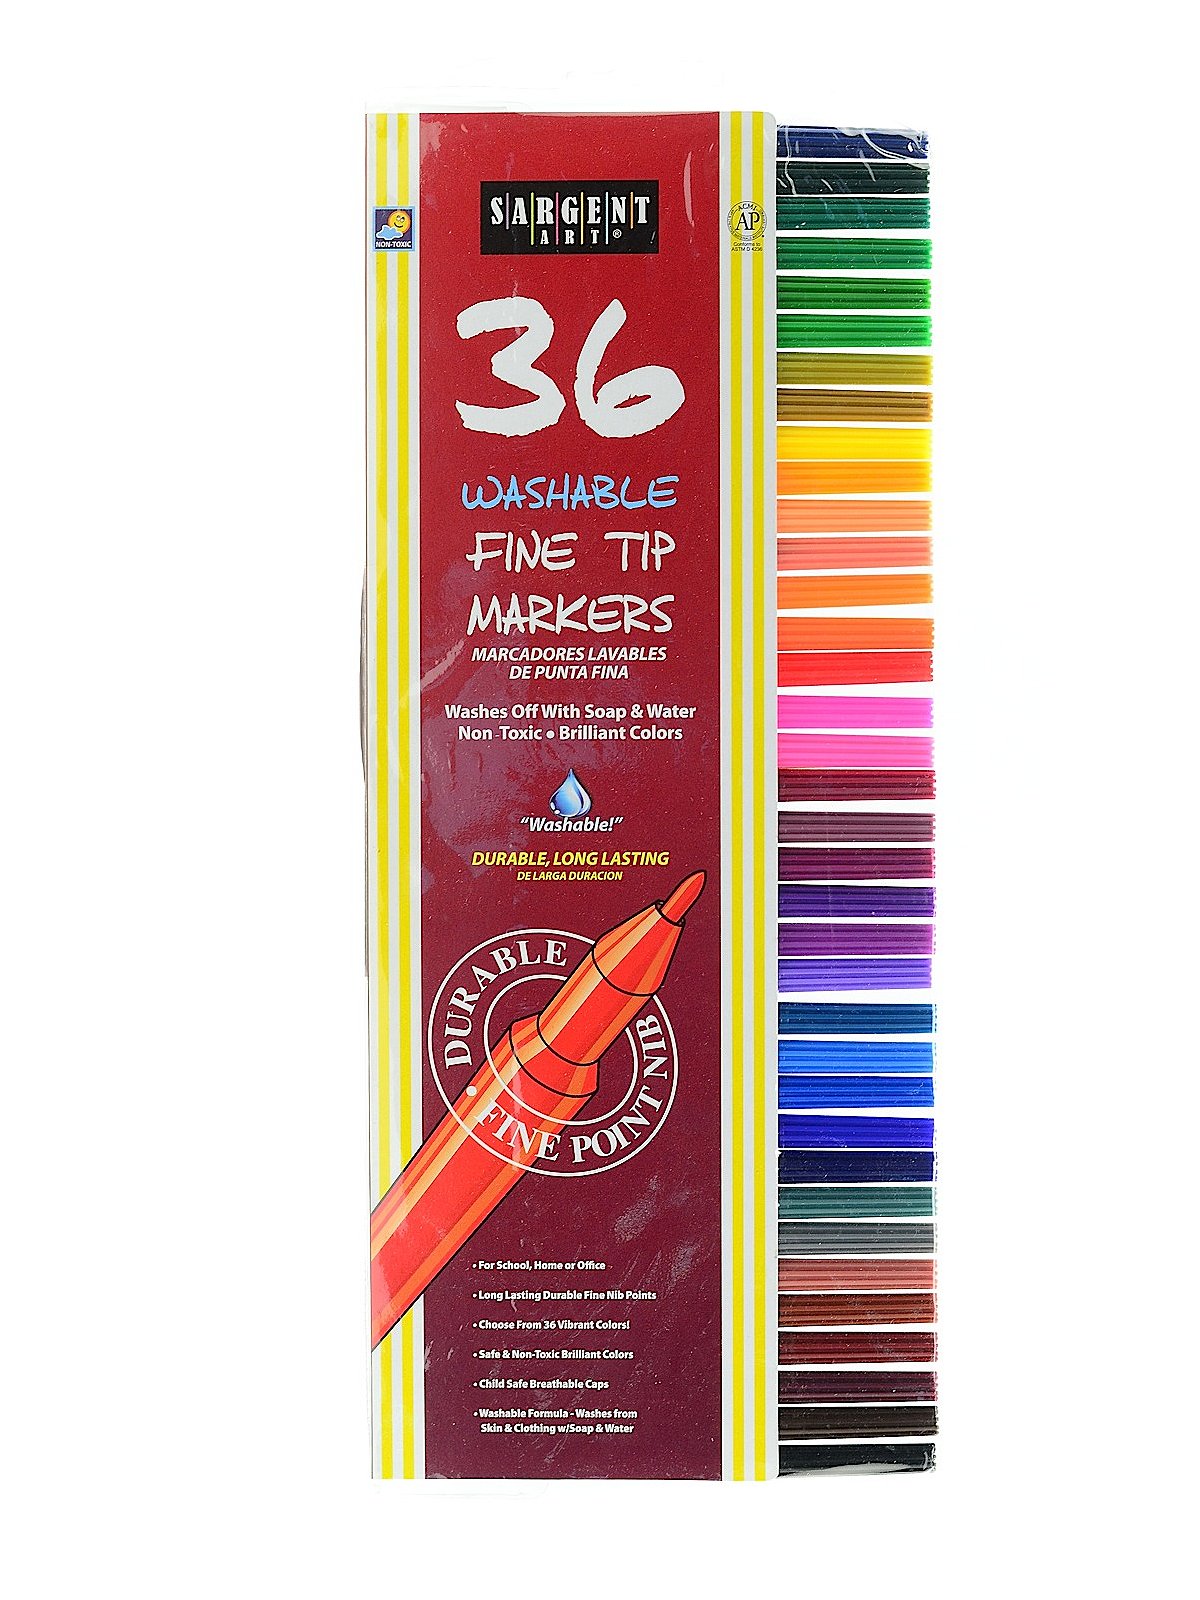 Sargent Art 30 Count Classic Markers, Fine Conical Tip, Plastic Peggable  Pouch 